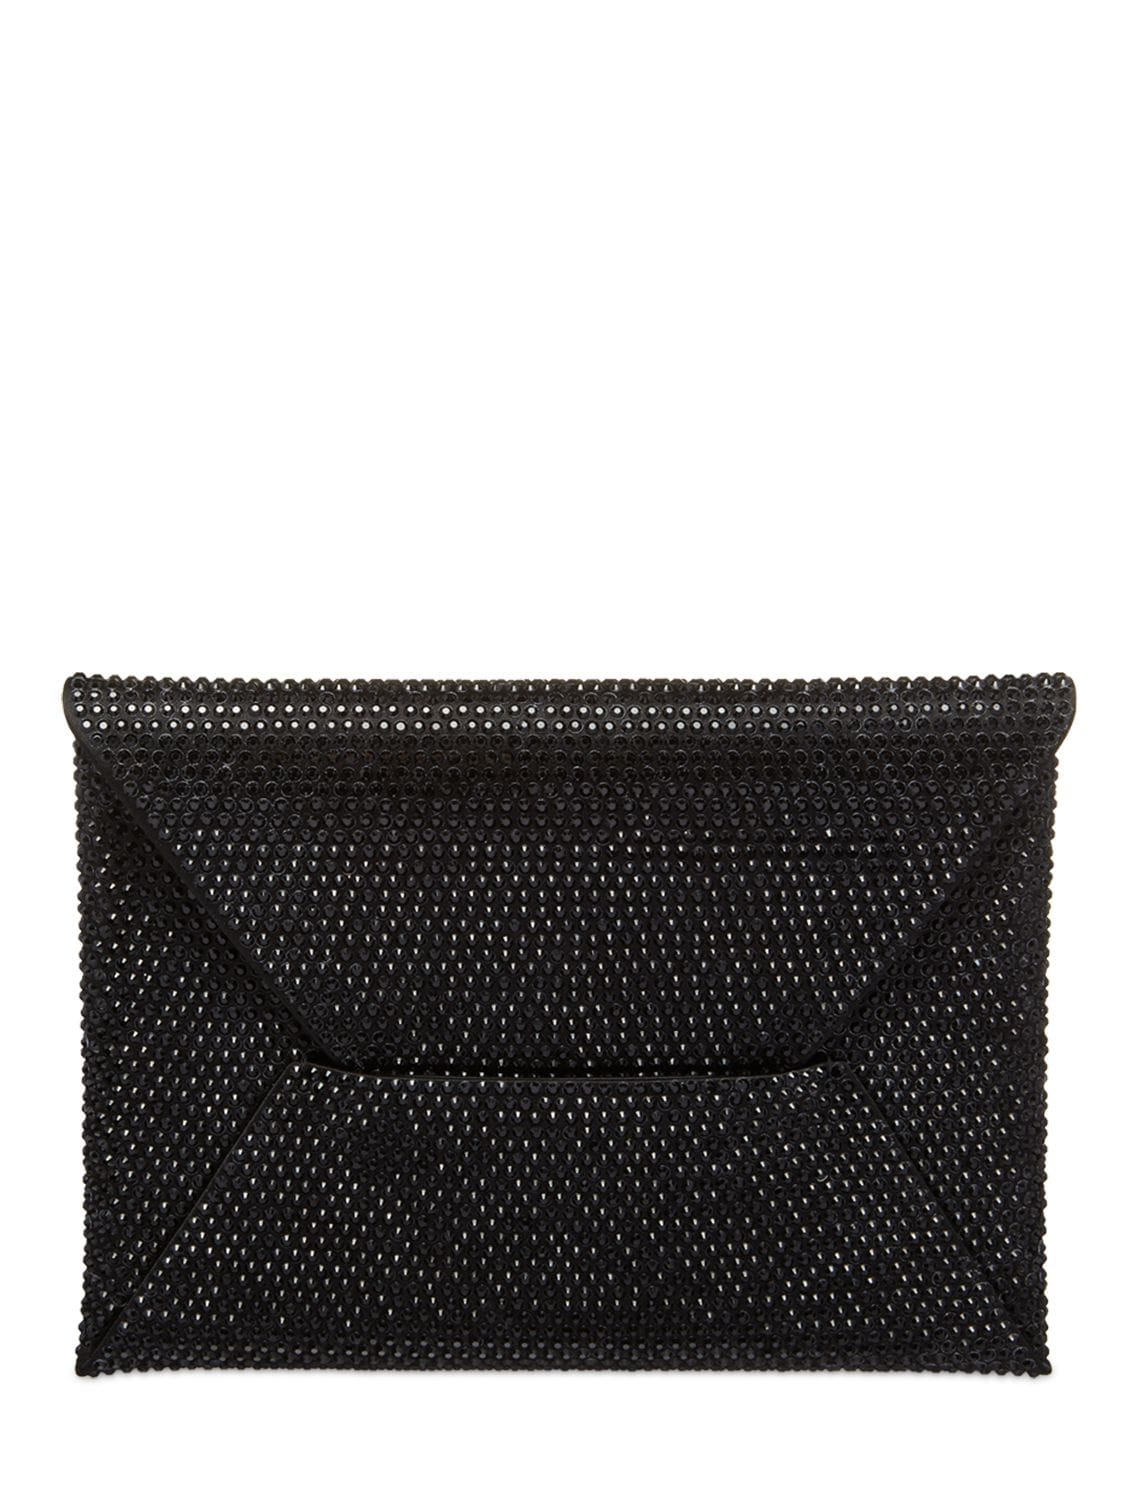 Image of Small Embellished Satin Clutch